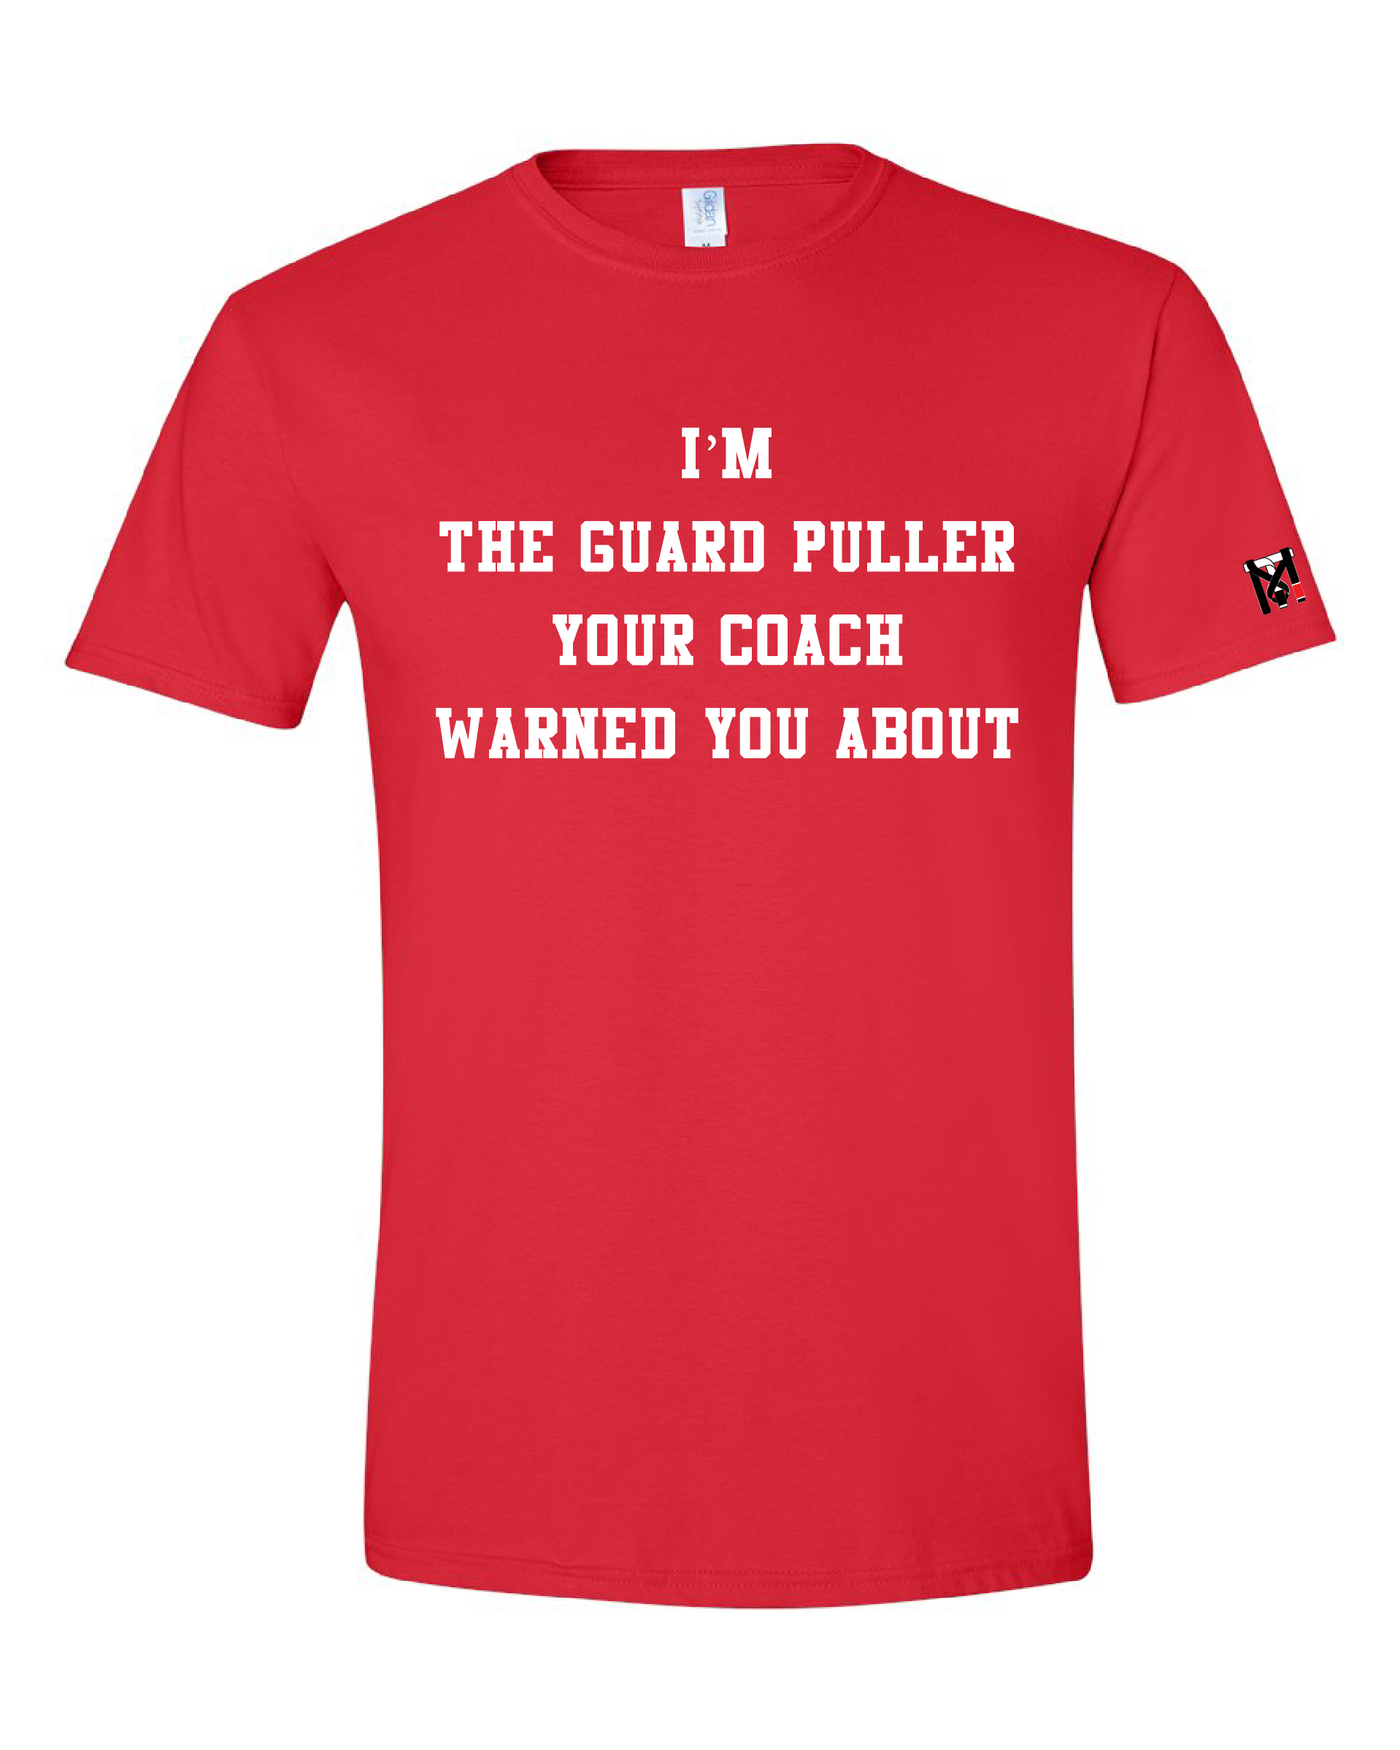 The Guard Puller Tee